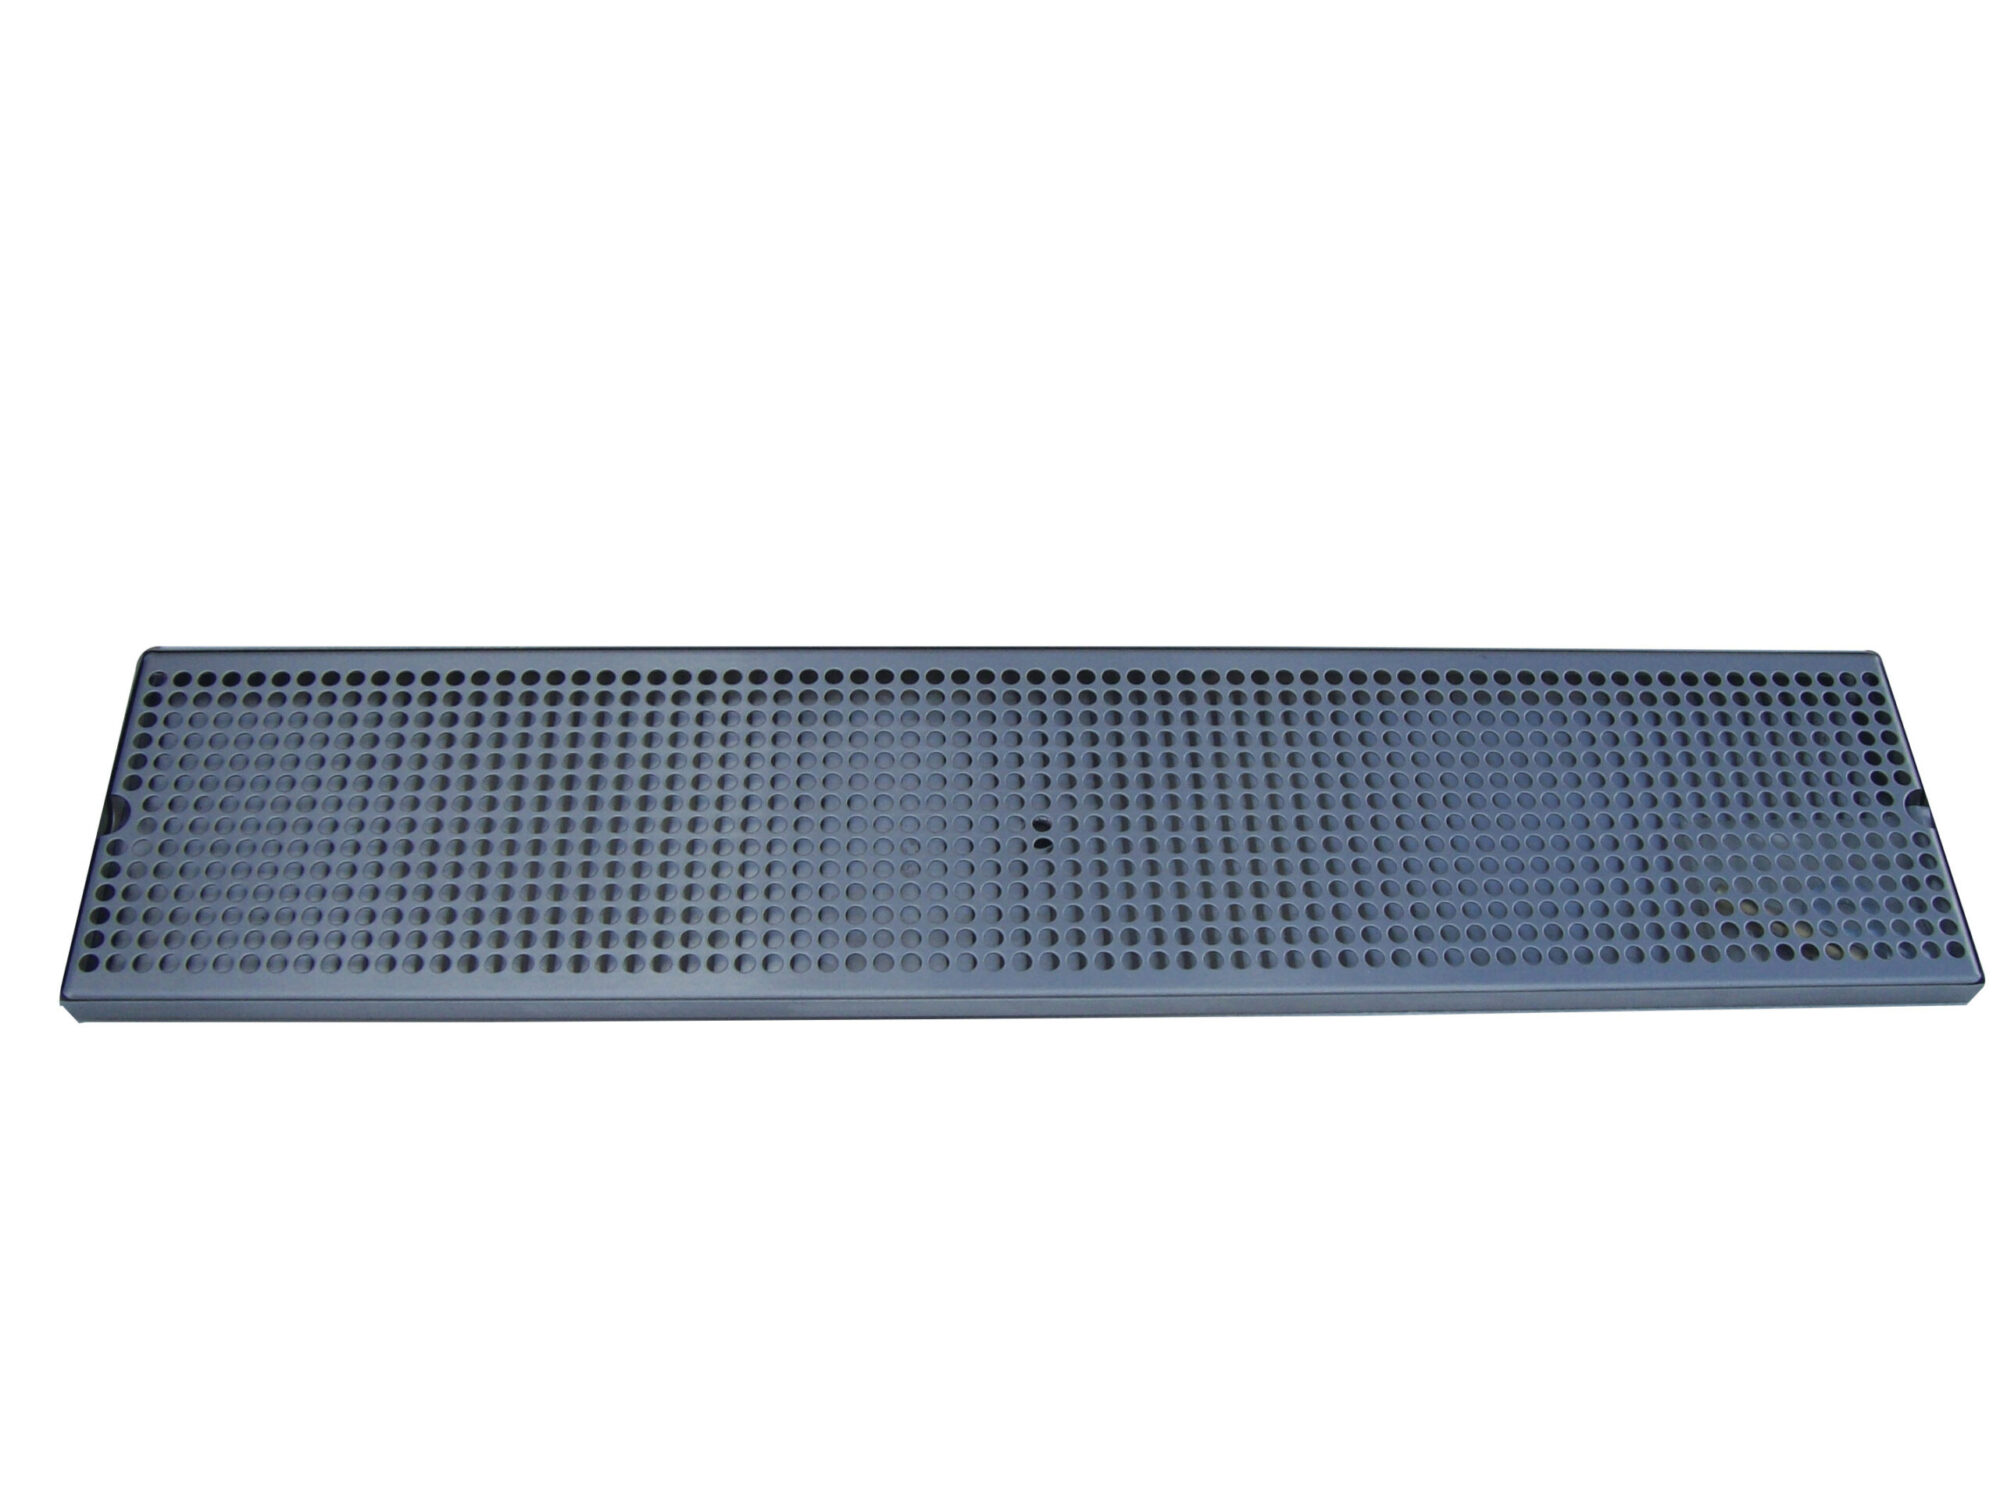 617S-36 Stainless Steel Tray and Perforated Grid Includes a 3 1/2" Threaded Drain Nipple - 36"L x 8"W